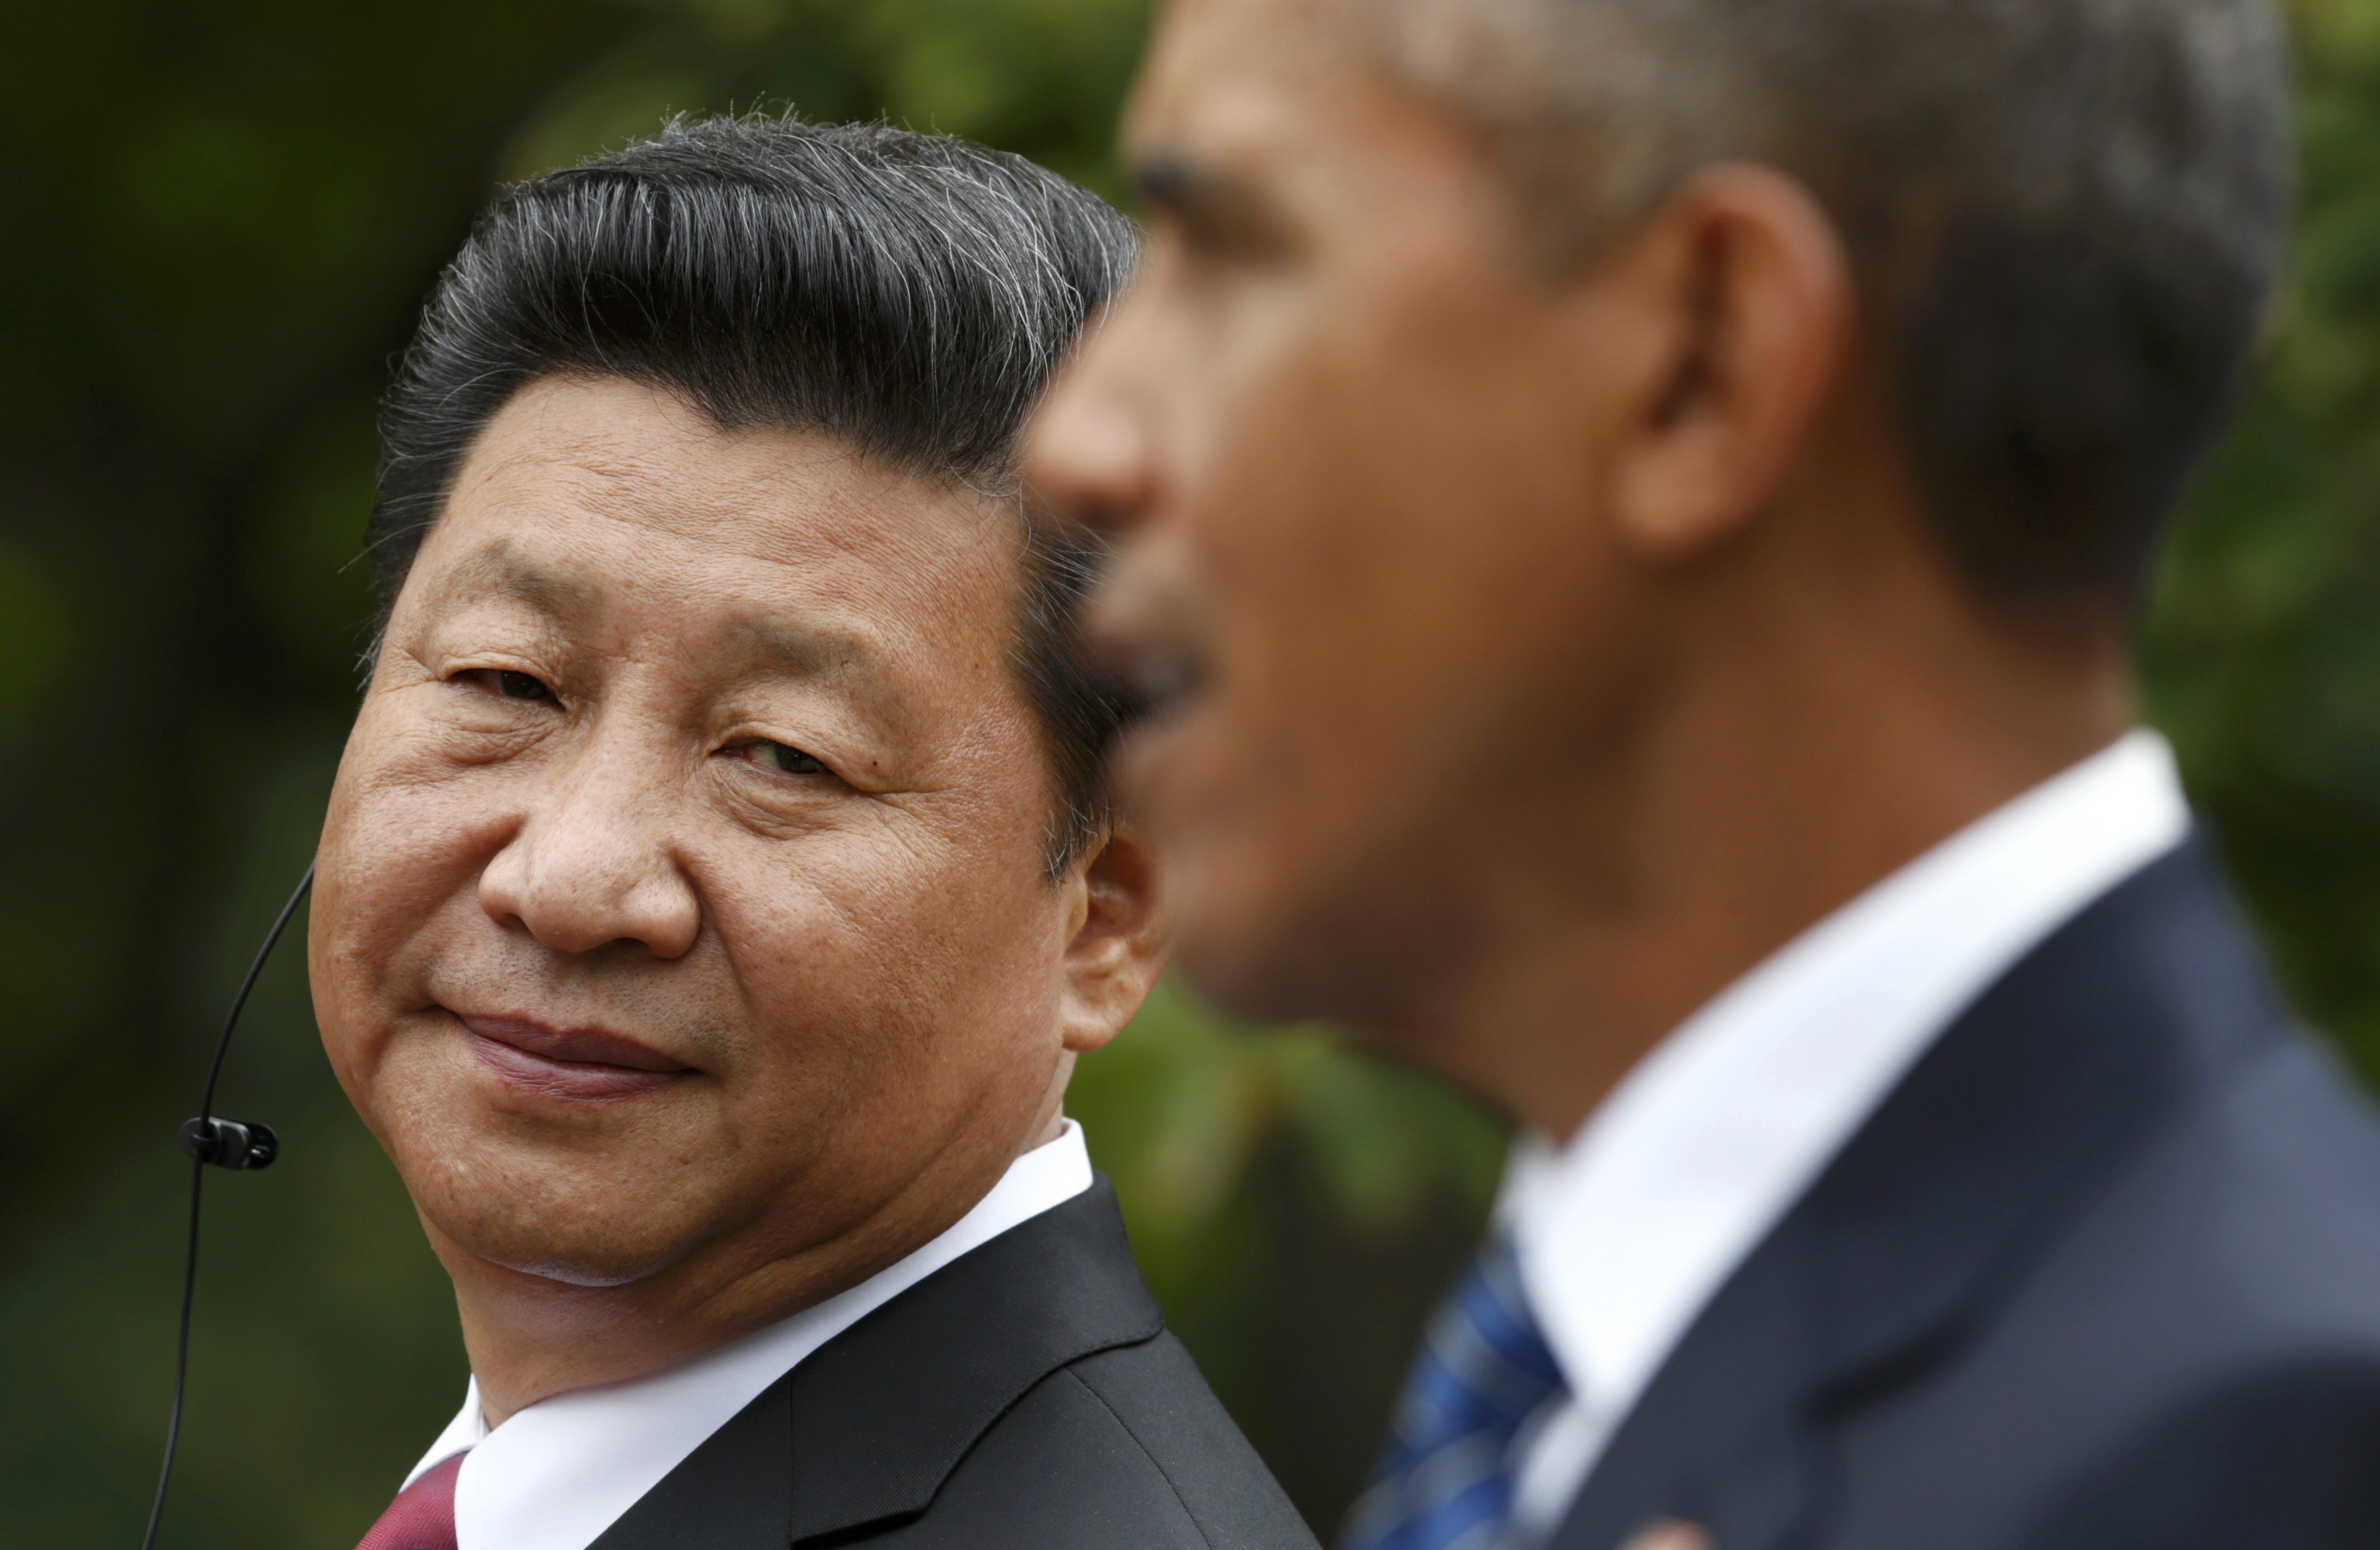 Chinese President Xi Jinping (L) listens to U.S. President Barack Obama during a joint news conference in the Rose Garden at the White House in Washington September 25, 2015. REUTERS/Kevin Lamarque